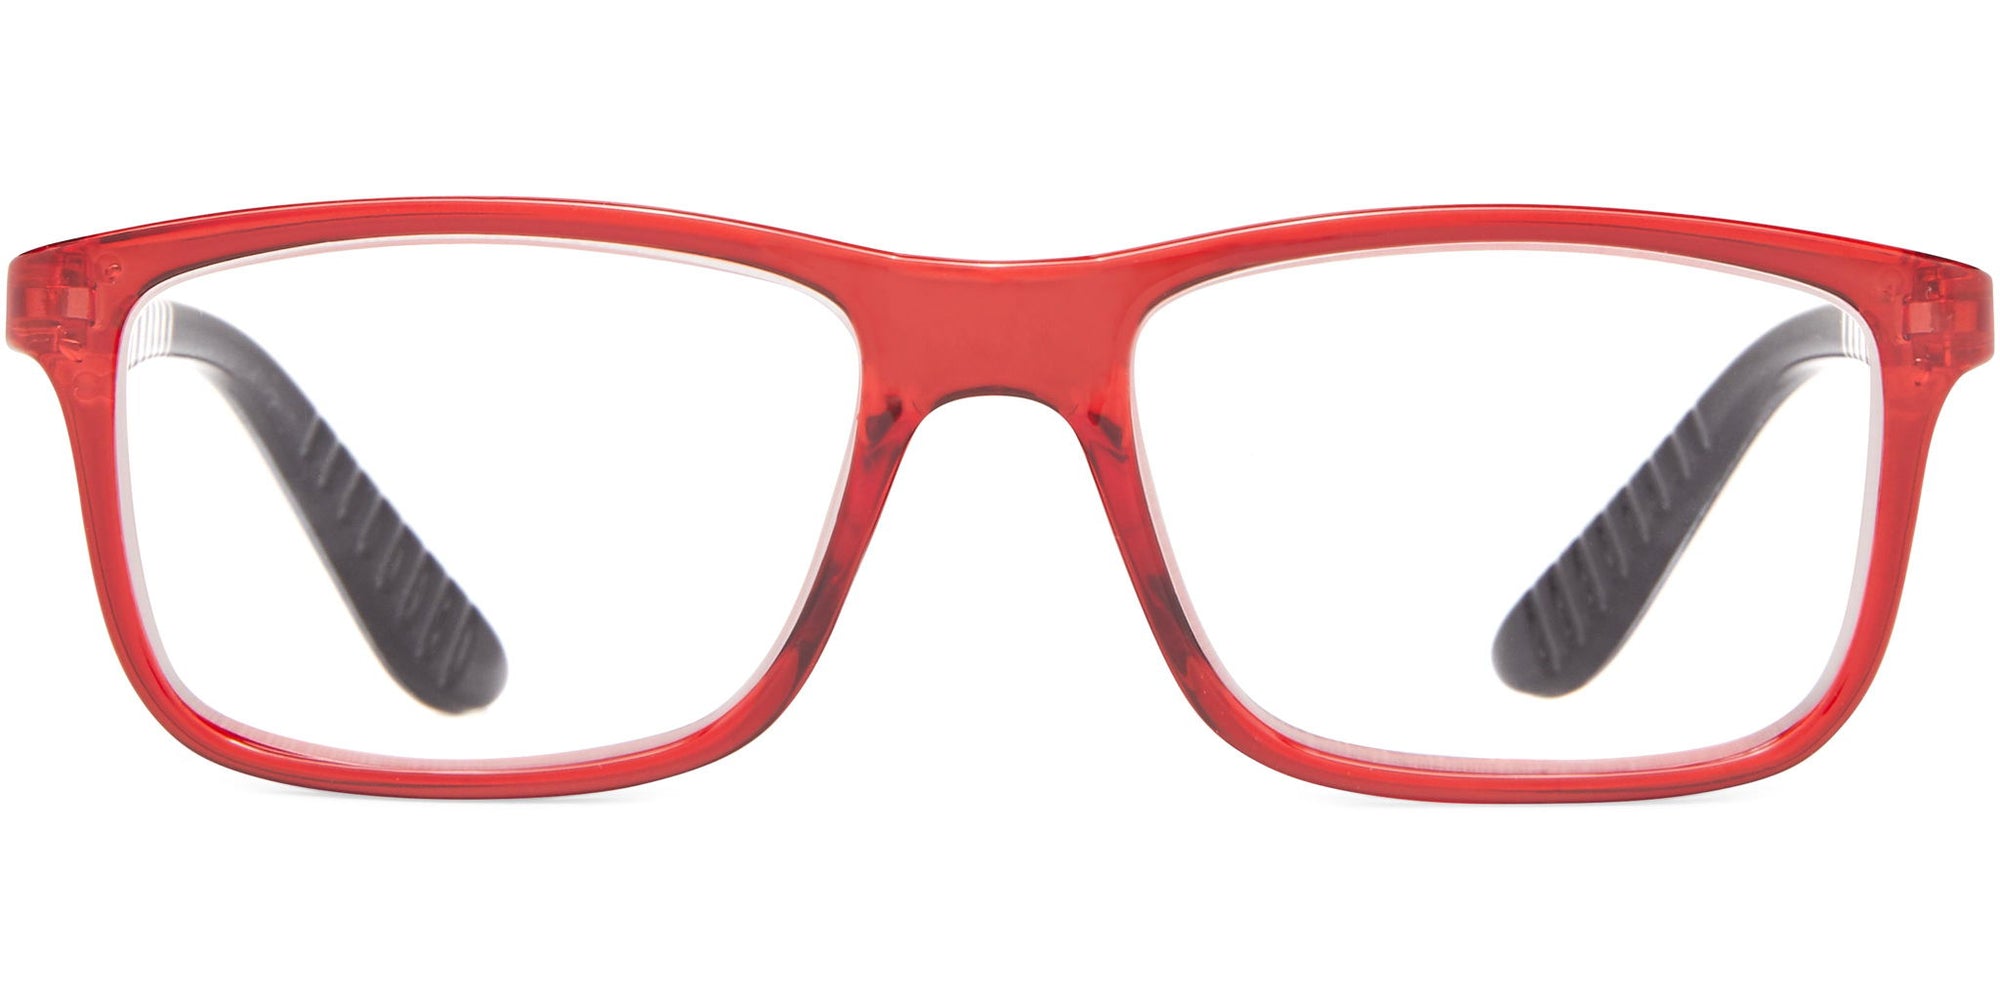 Carly - Red / 1.25 - Reading Glasses